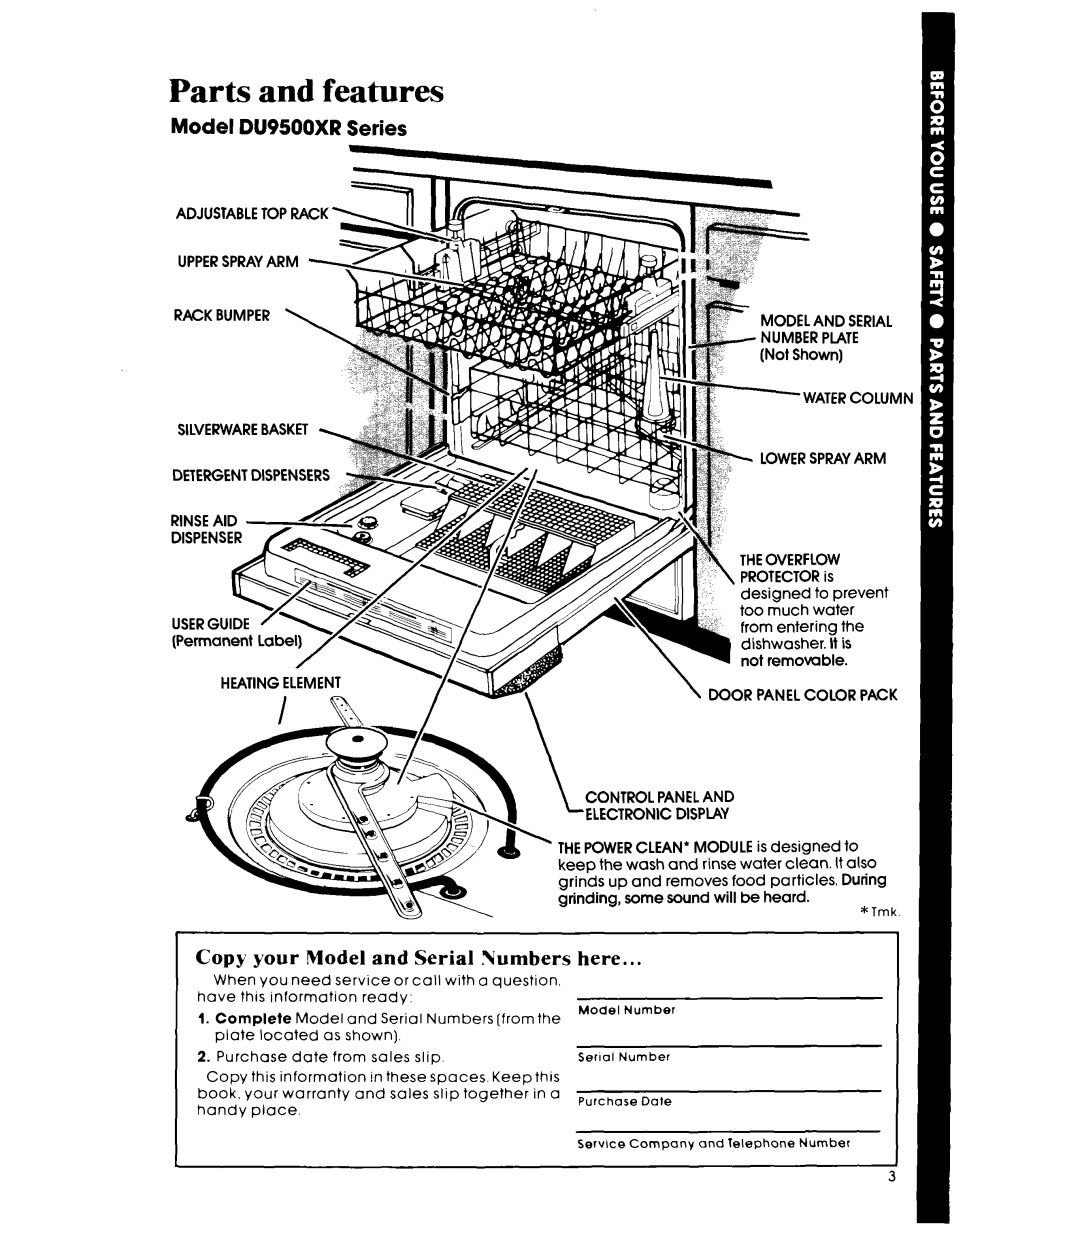 Whirlpool manual Parts and features, Model DU9500XR Series, Copy your Model and Serial Numbers, here 